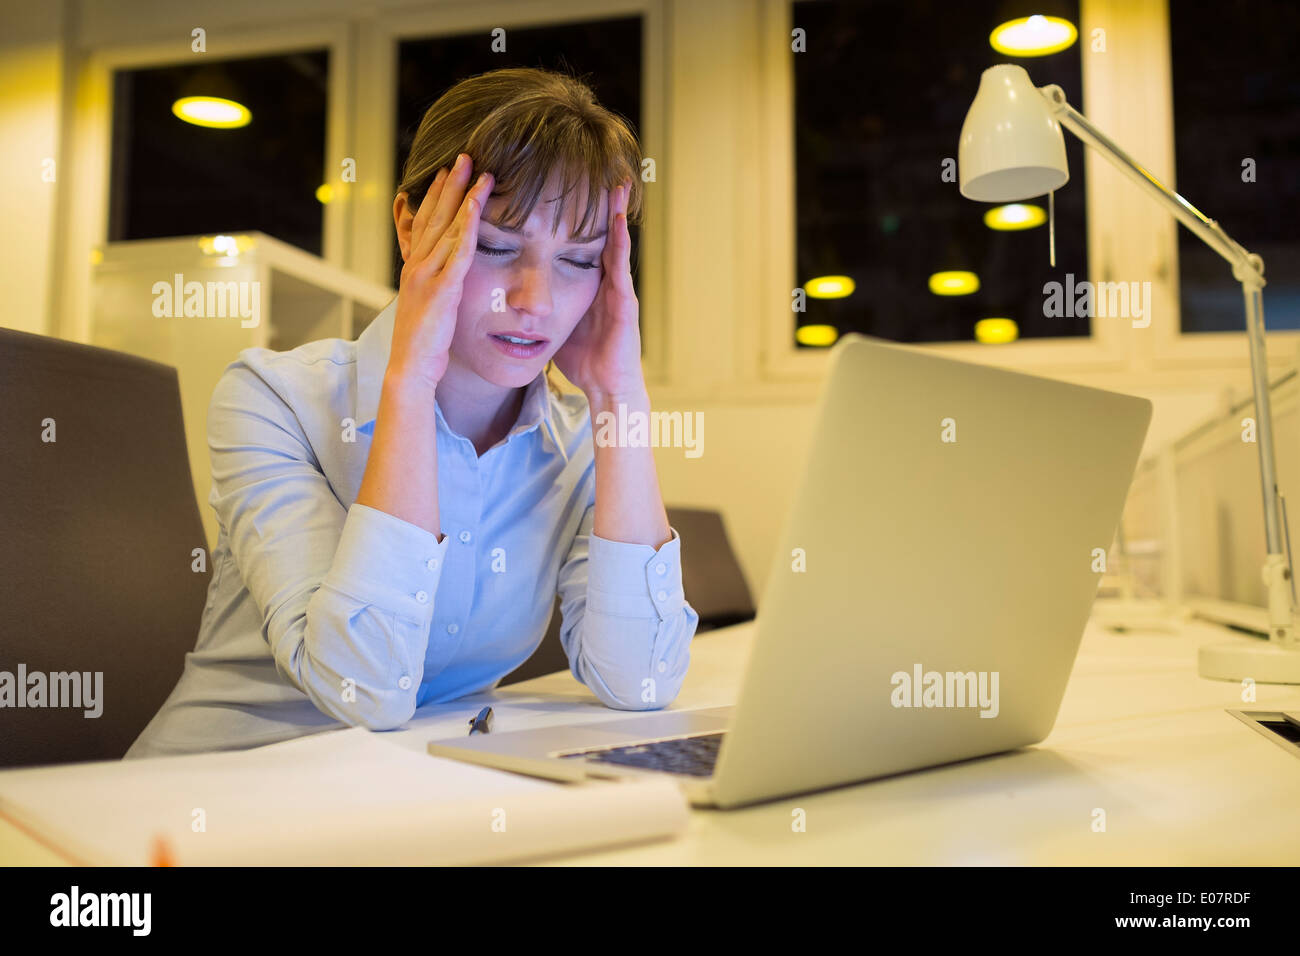 Female business tired working late startup student desk Stock Photo